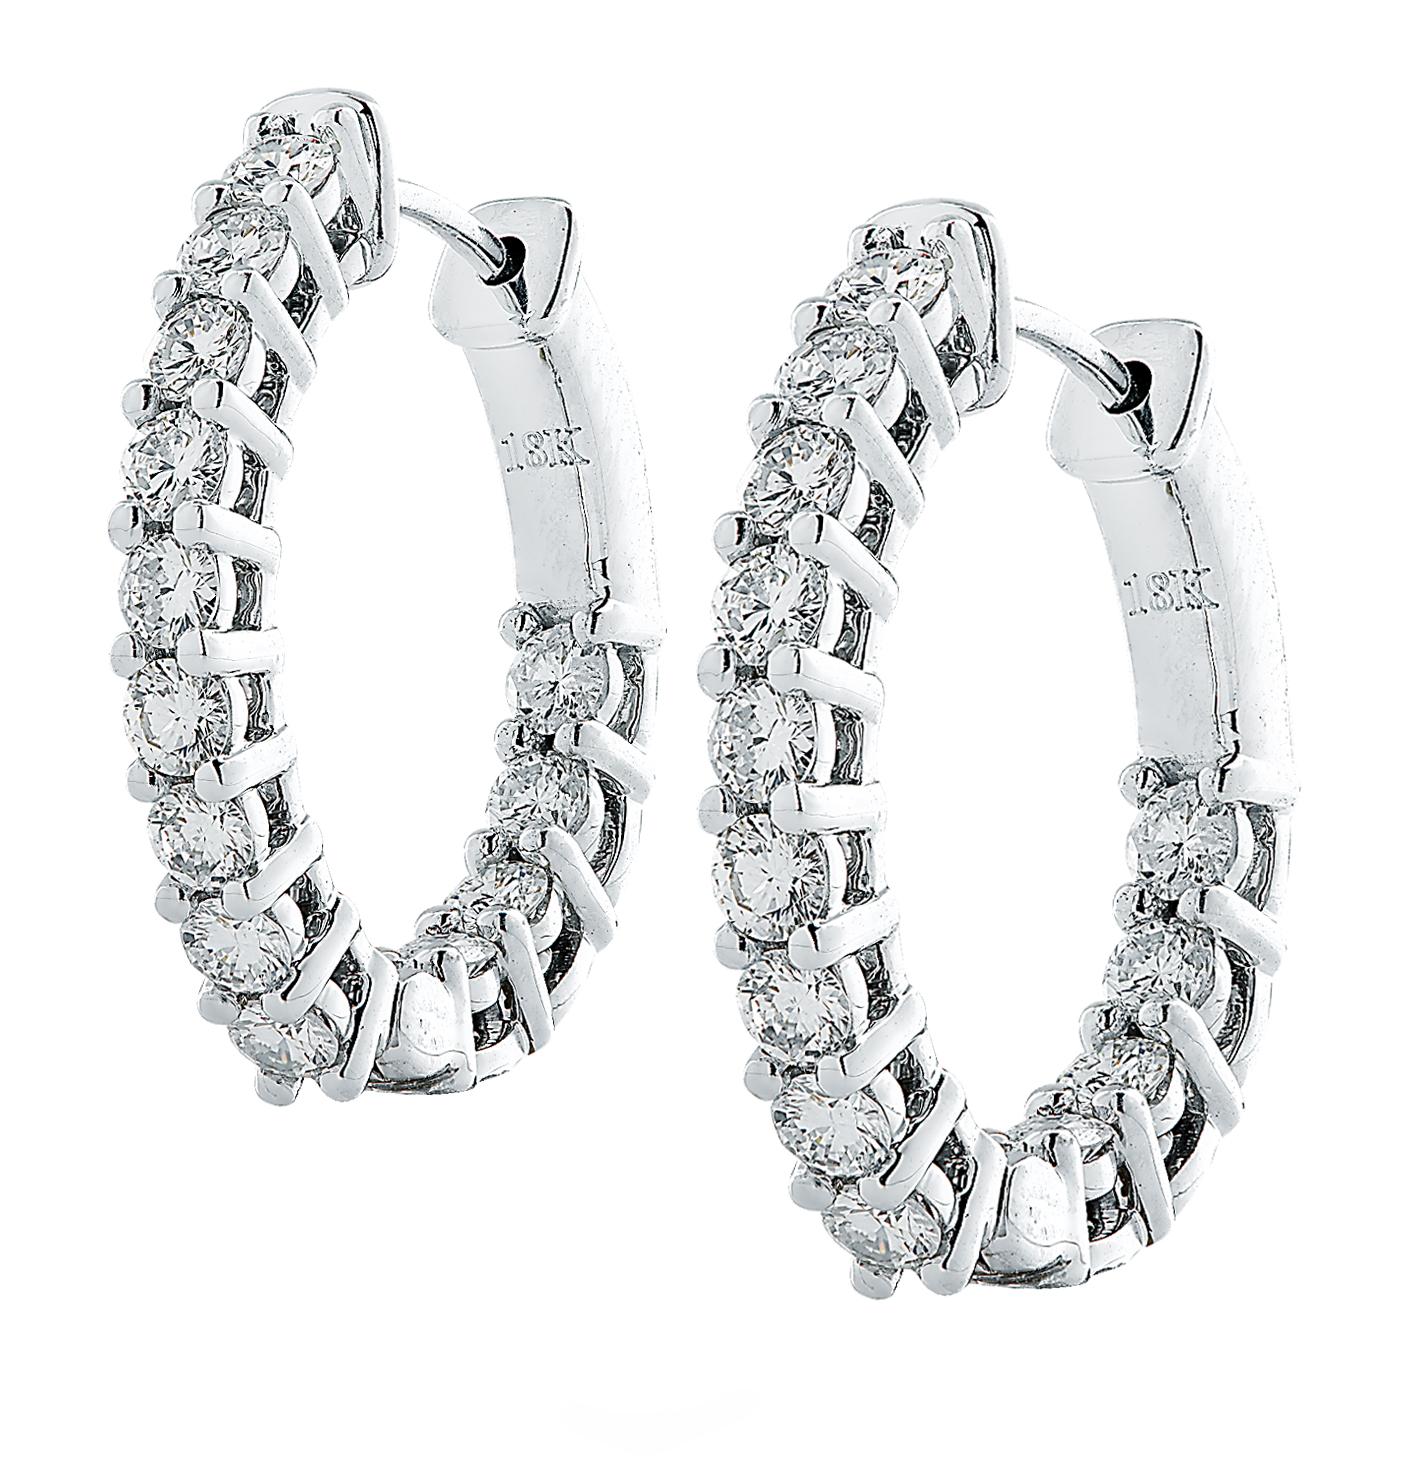 Spectacular Vivid Diamonds In/Out diamond hoop earrings crafted in 18 karat white gold showcasing 26 round brilliant cut diamonds weighing 1.57 carats total, G-H color, VS-SI clarity. Each diamond is carefully selected, perfectly matched and set on